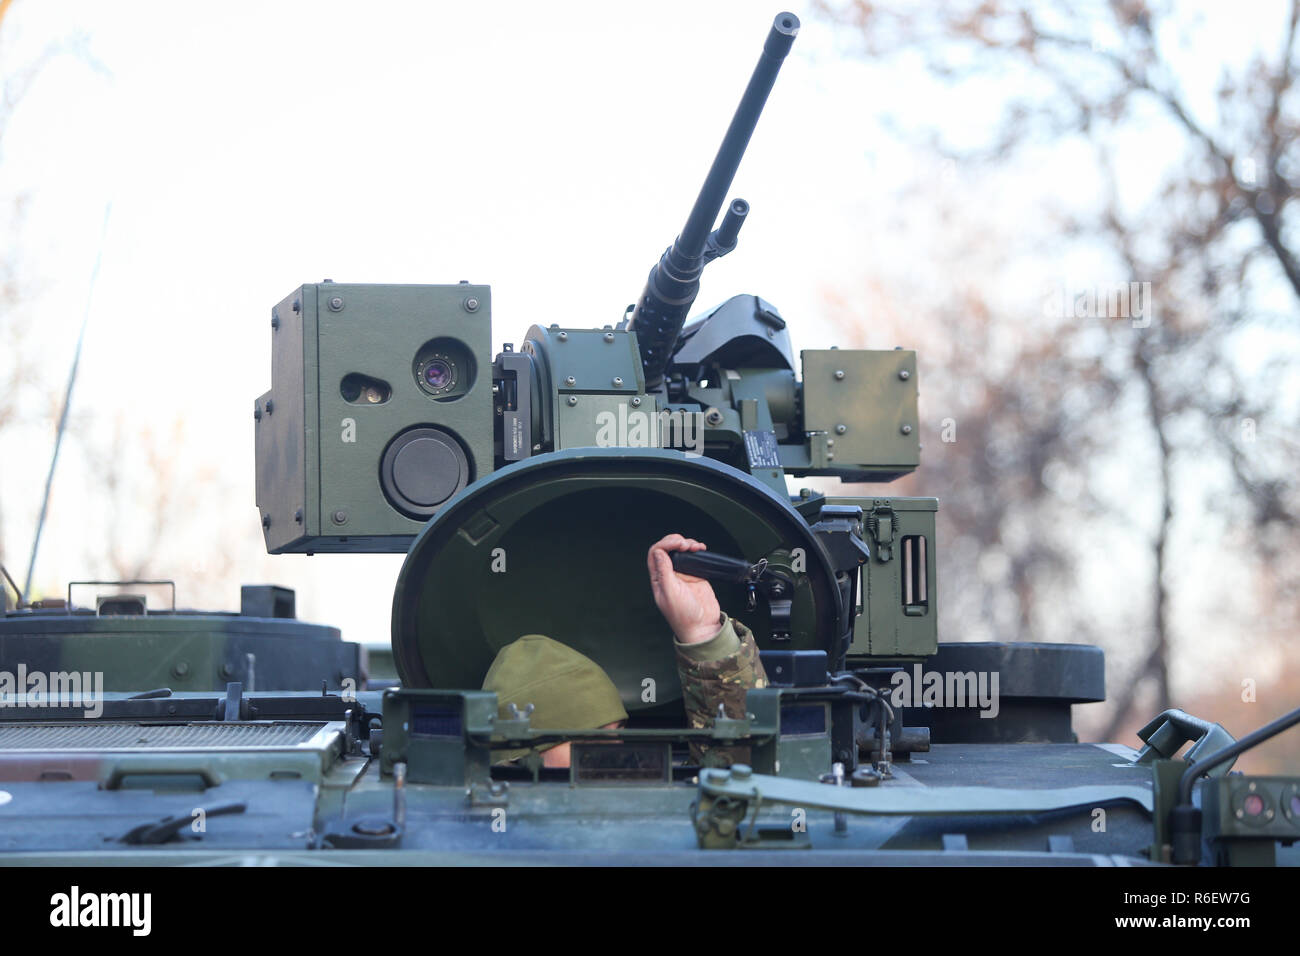 BUCHAREST, ROMANIA - December 1, 2018: Anti-aircraft vehicle, also known as a self-propelled anti-aircraft gun (SPAAG) or self-propelled air defense s Stock Photo